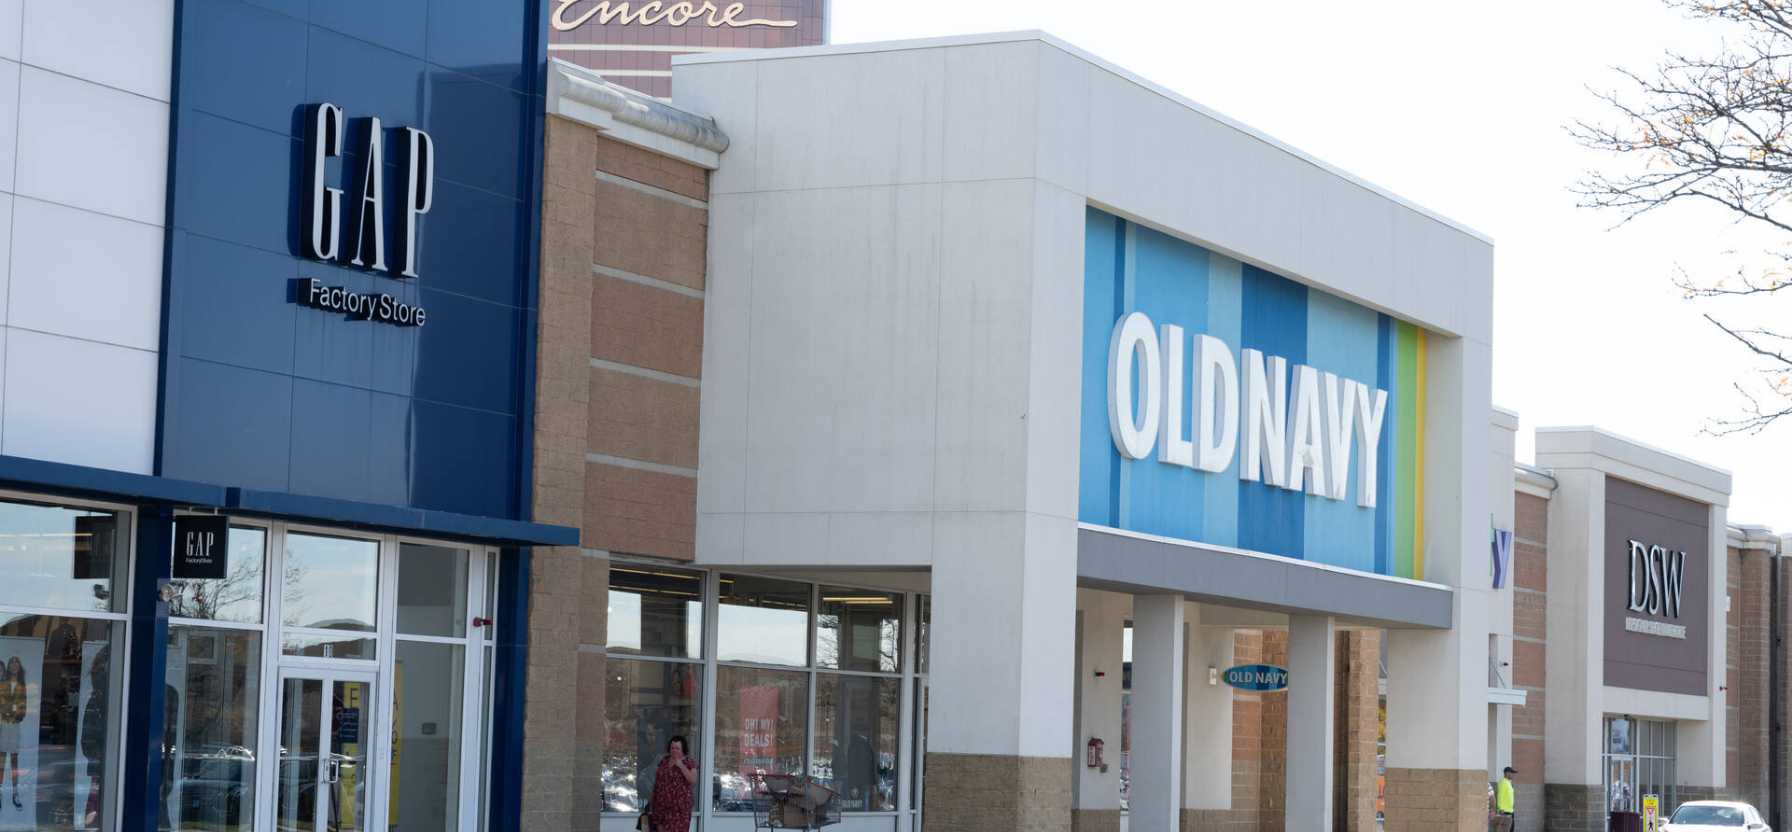 Gateway Center - Old Navy and Gap store exterior photo